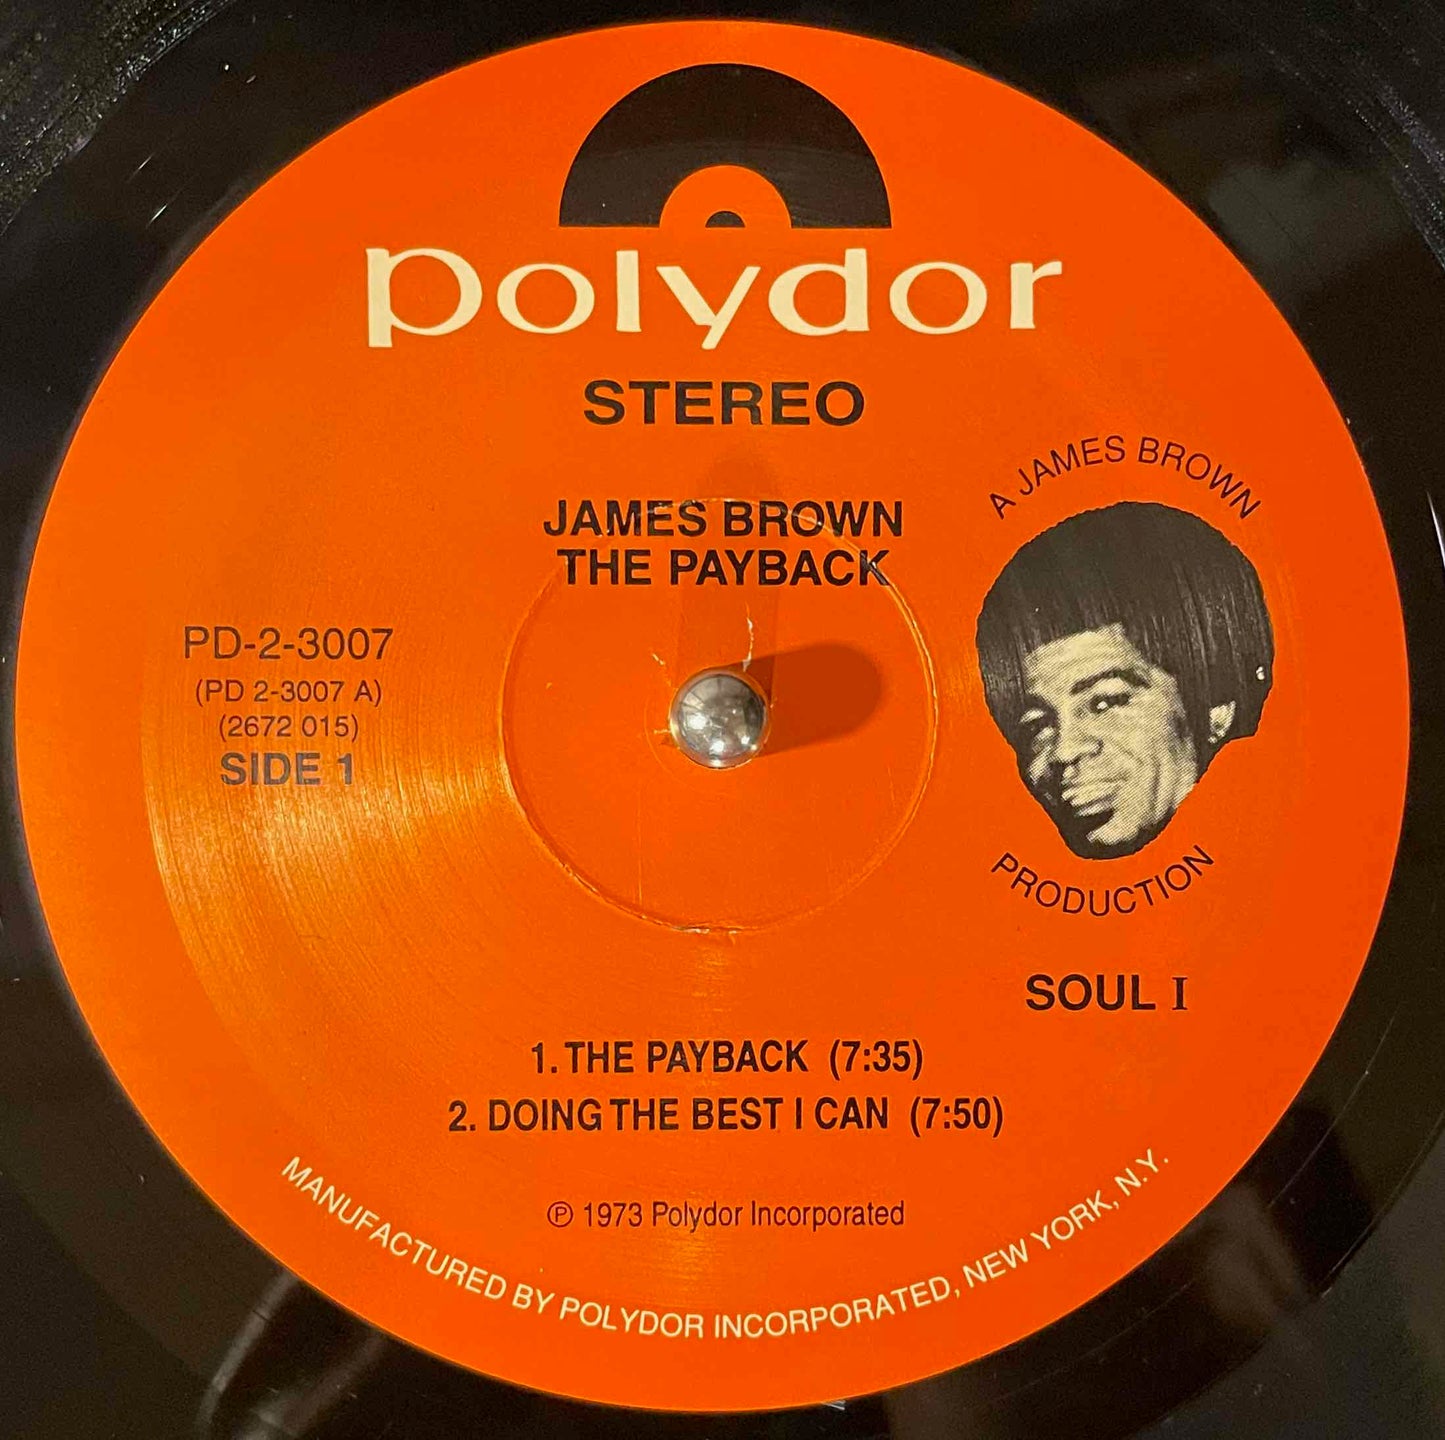 James Brown – The Payback LP label image side 1